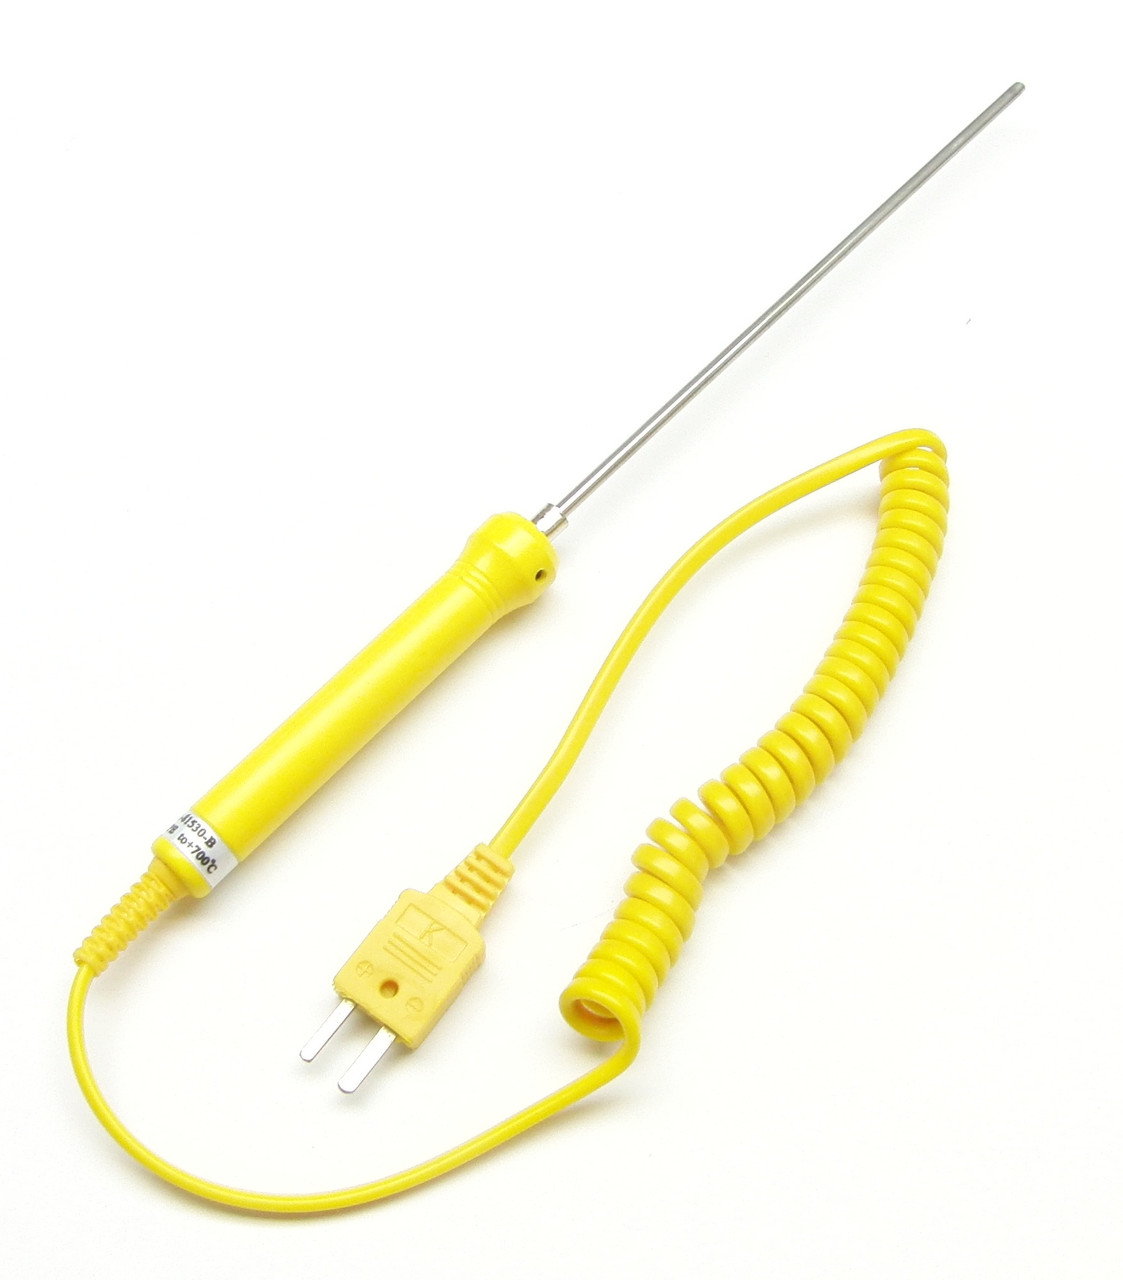 Digital K-type Thermocouple Thermometer for HVAC DT1312